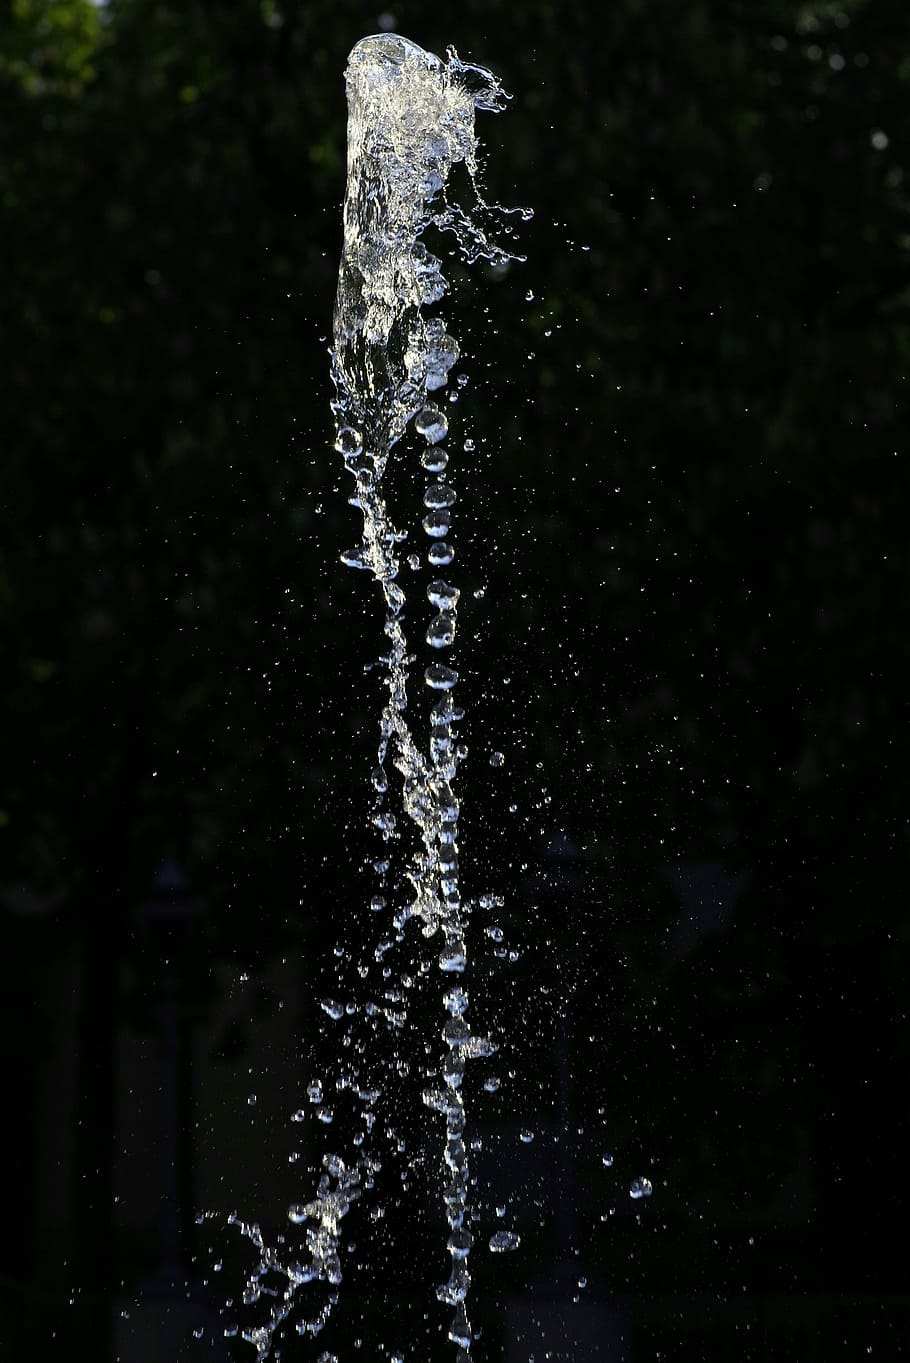 Waterworks, Fountain, Water, Crystal, clean, source, squirt, spraying, drops, heat